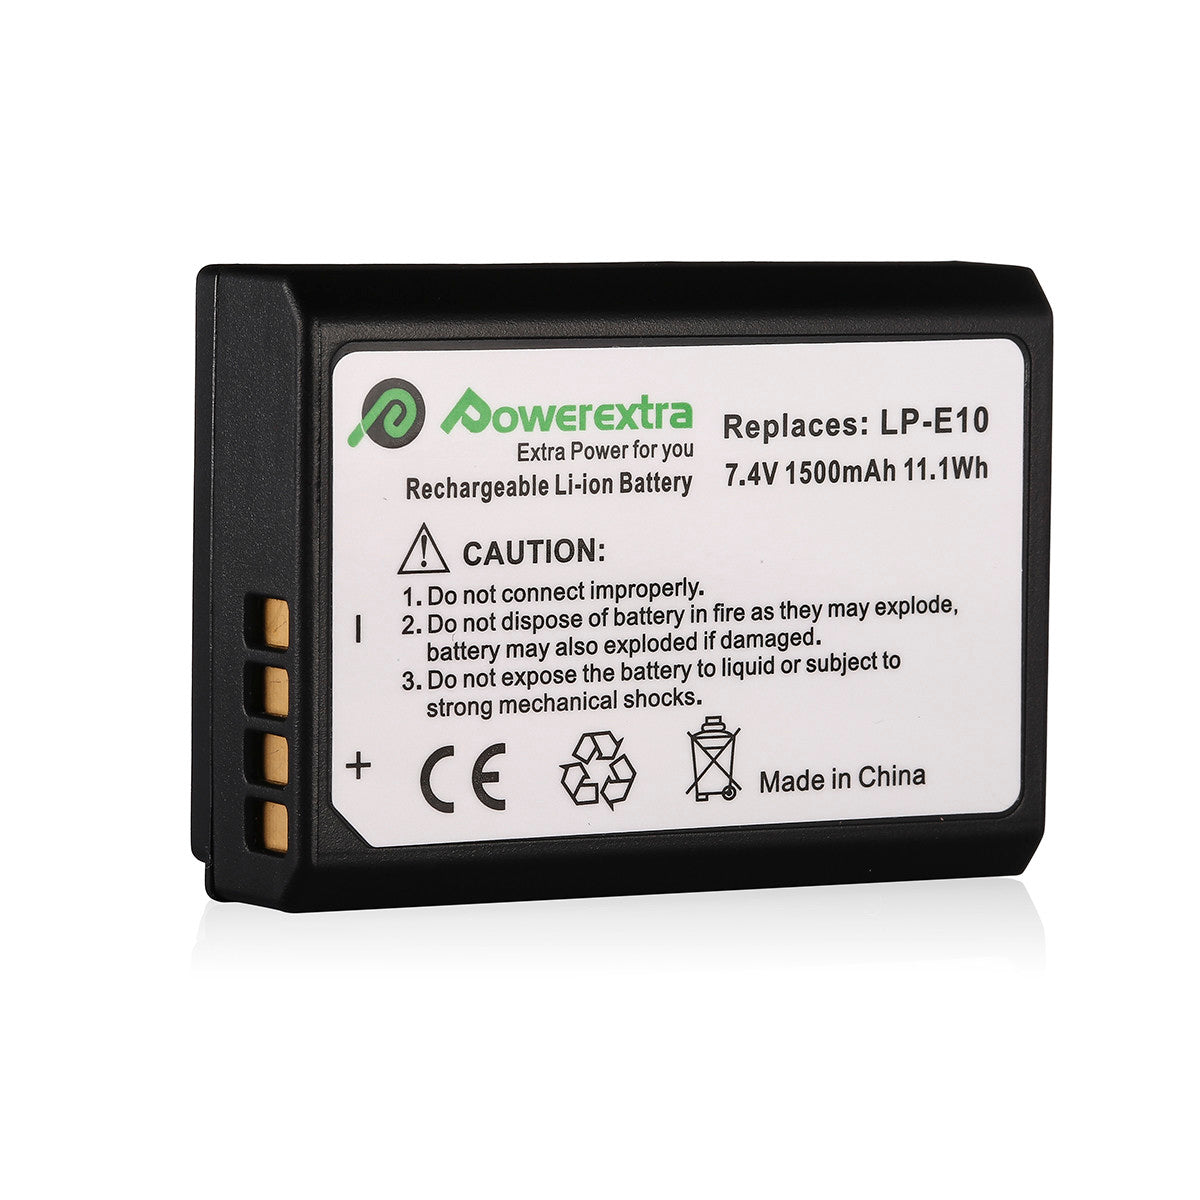 Powerextra LP-E10 Replacement Battery